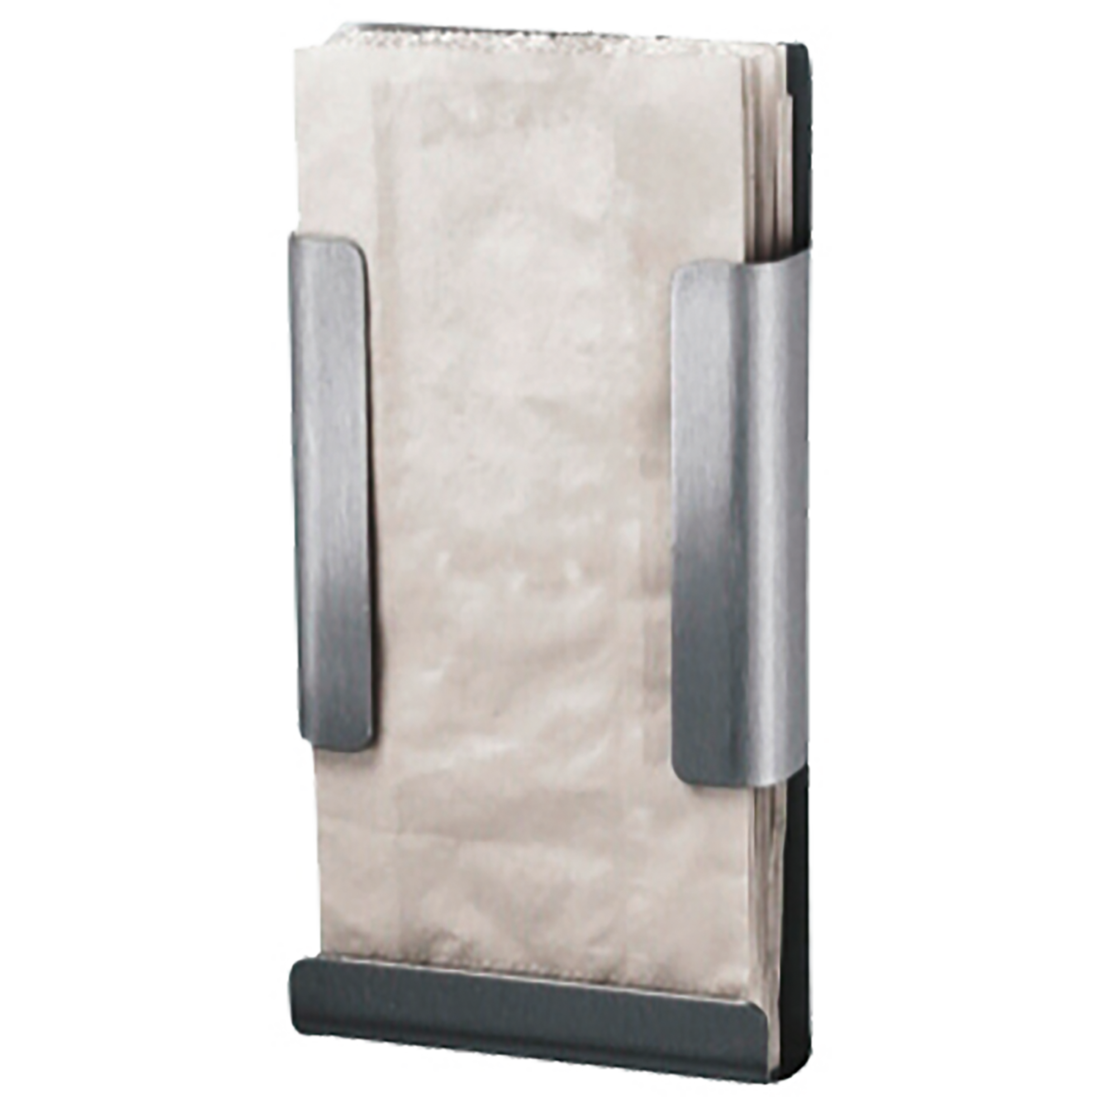 CWS Stainless Steel Holder for Hygiene Bags 